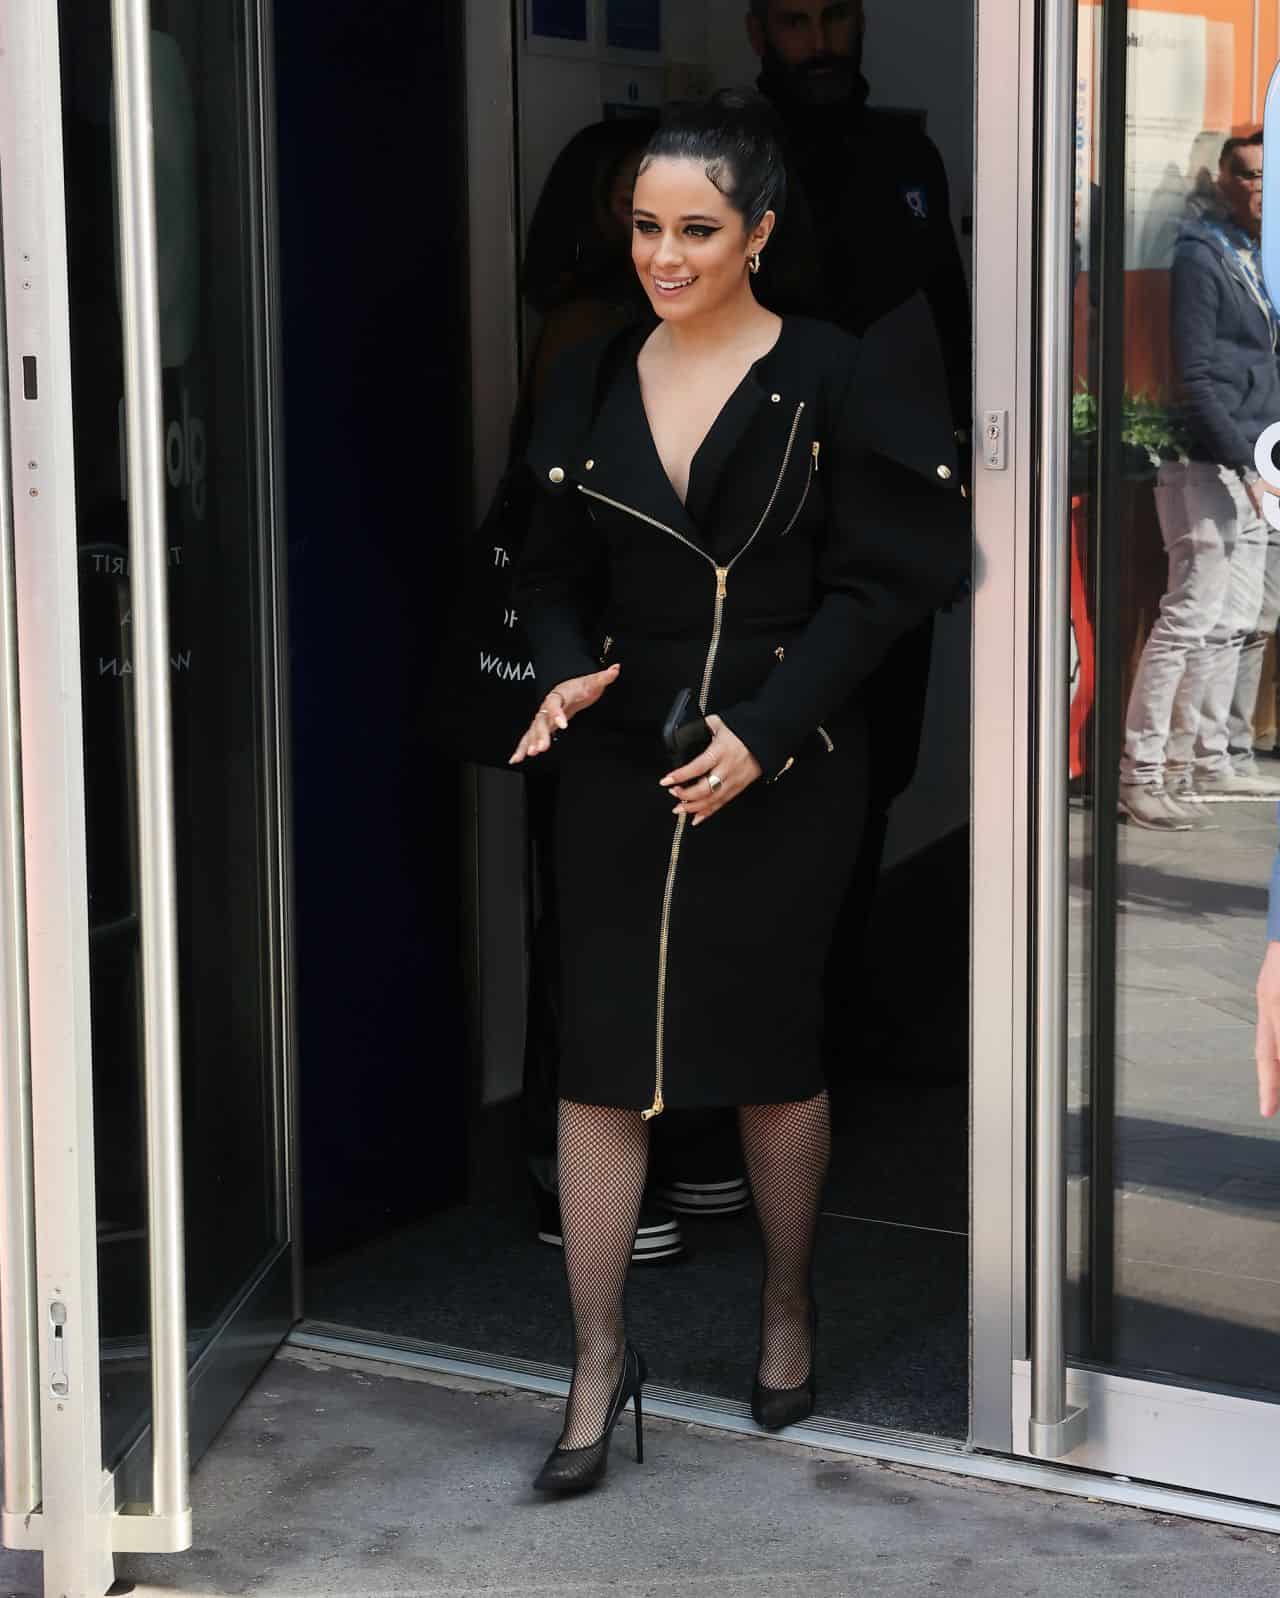 Camila Cabello Looks Stunning in a Dramatic Little Black Dress in London